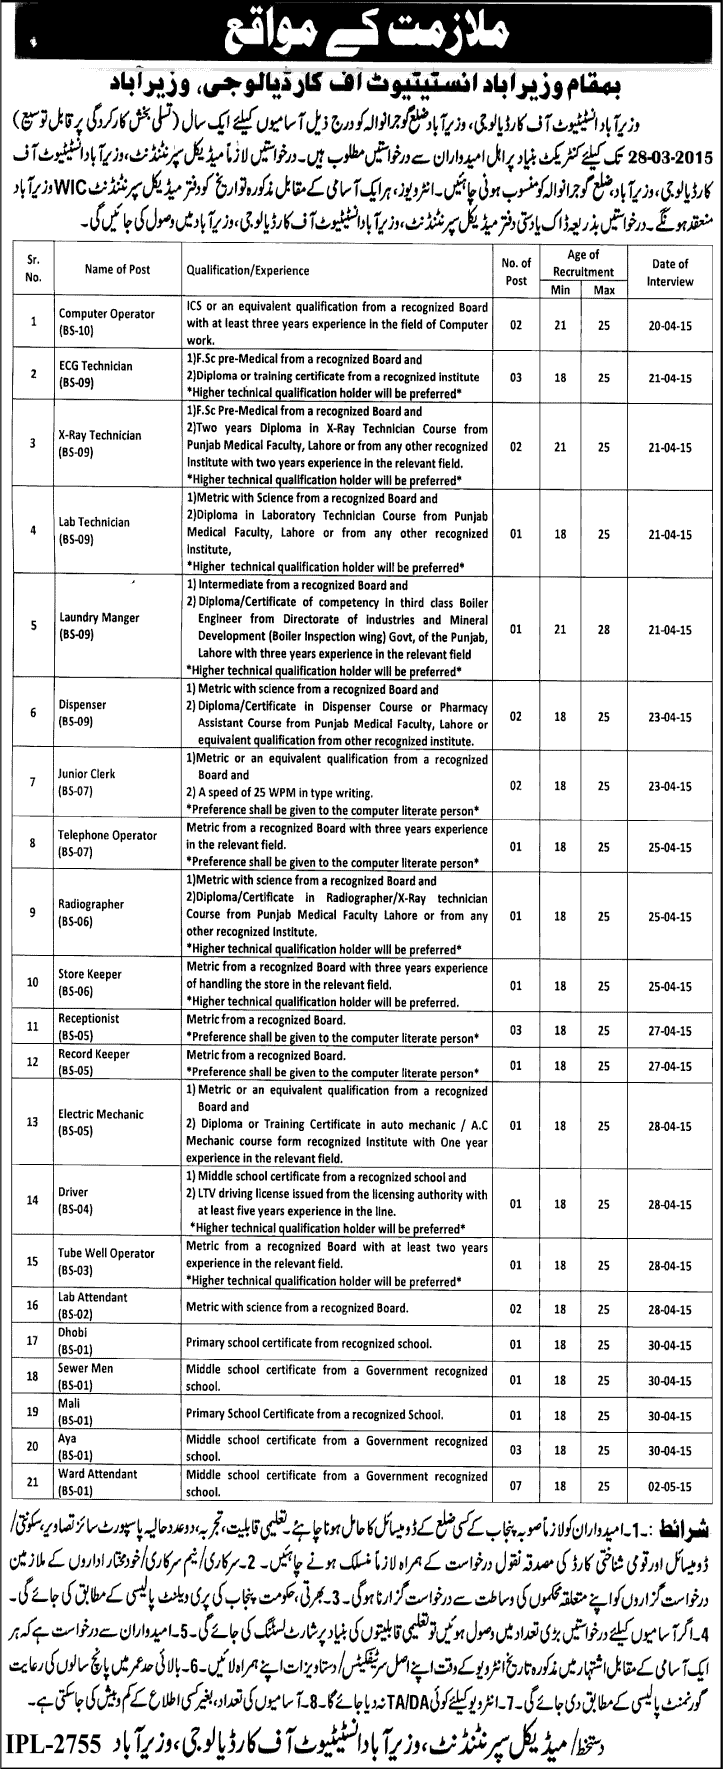 Wazirabad Institute of Cardiology Jobs 2015 March WIC Hospital, Paramedical, Admin & Support Staff